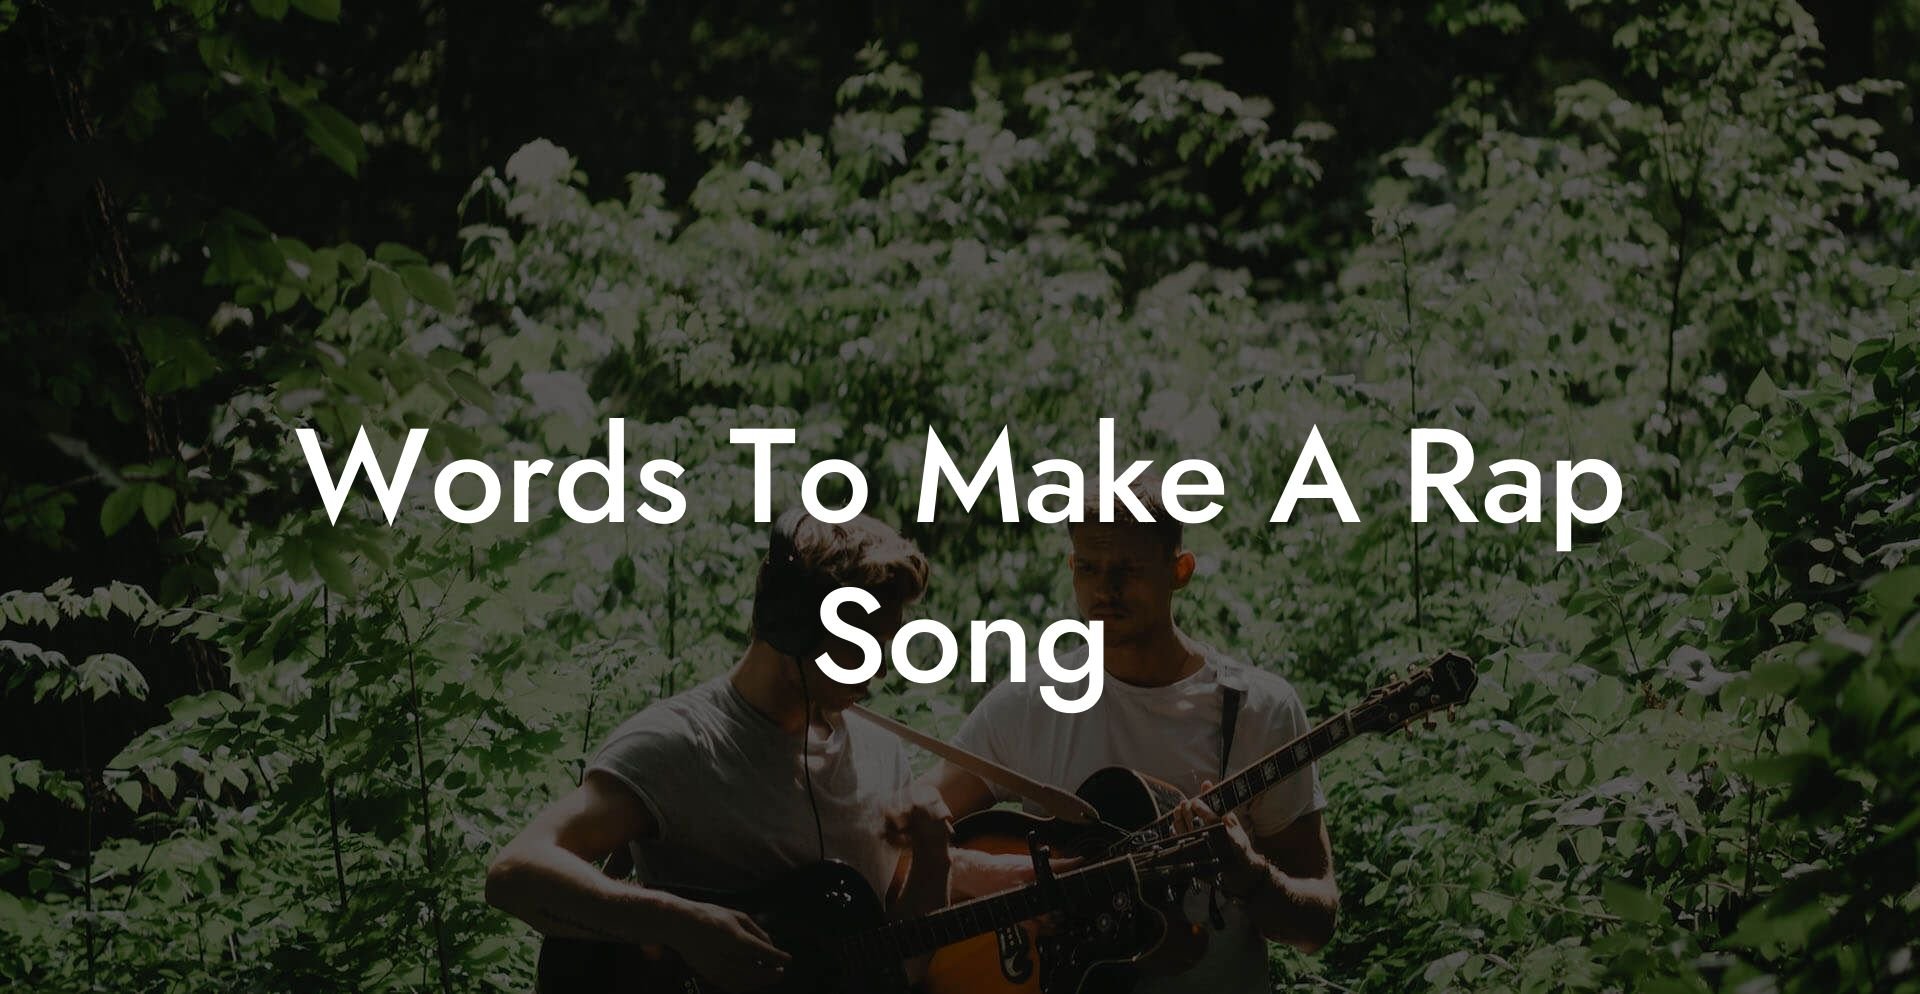 words to make a rap song lyric assistant